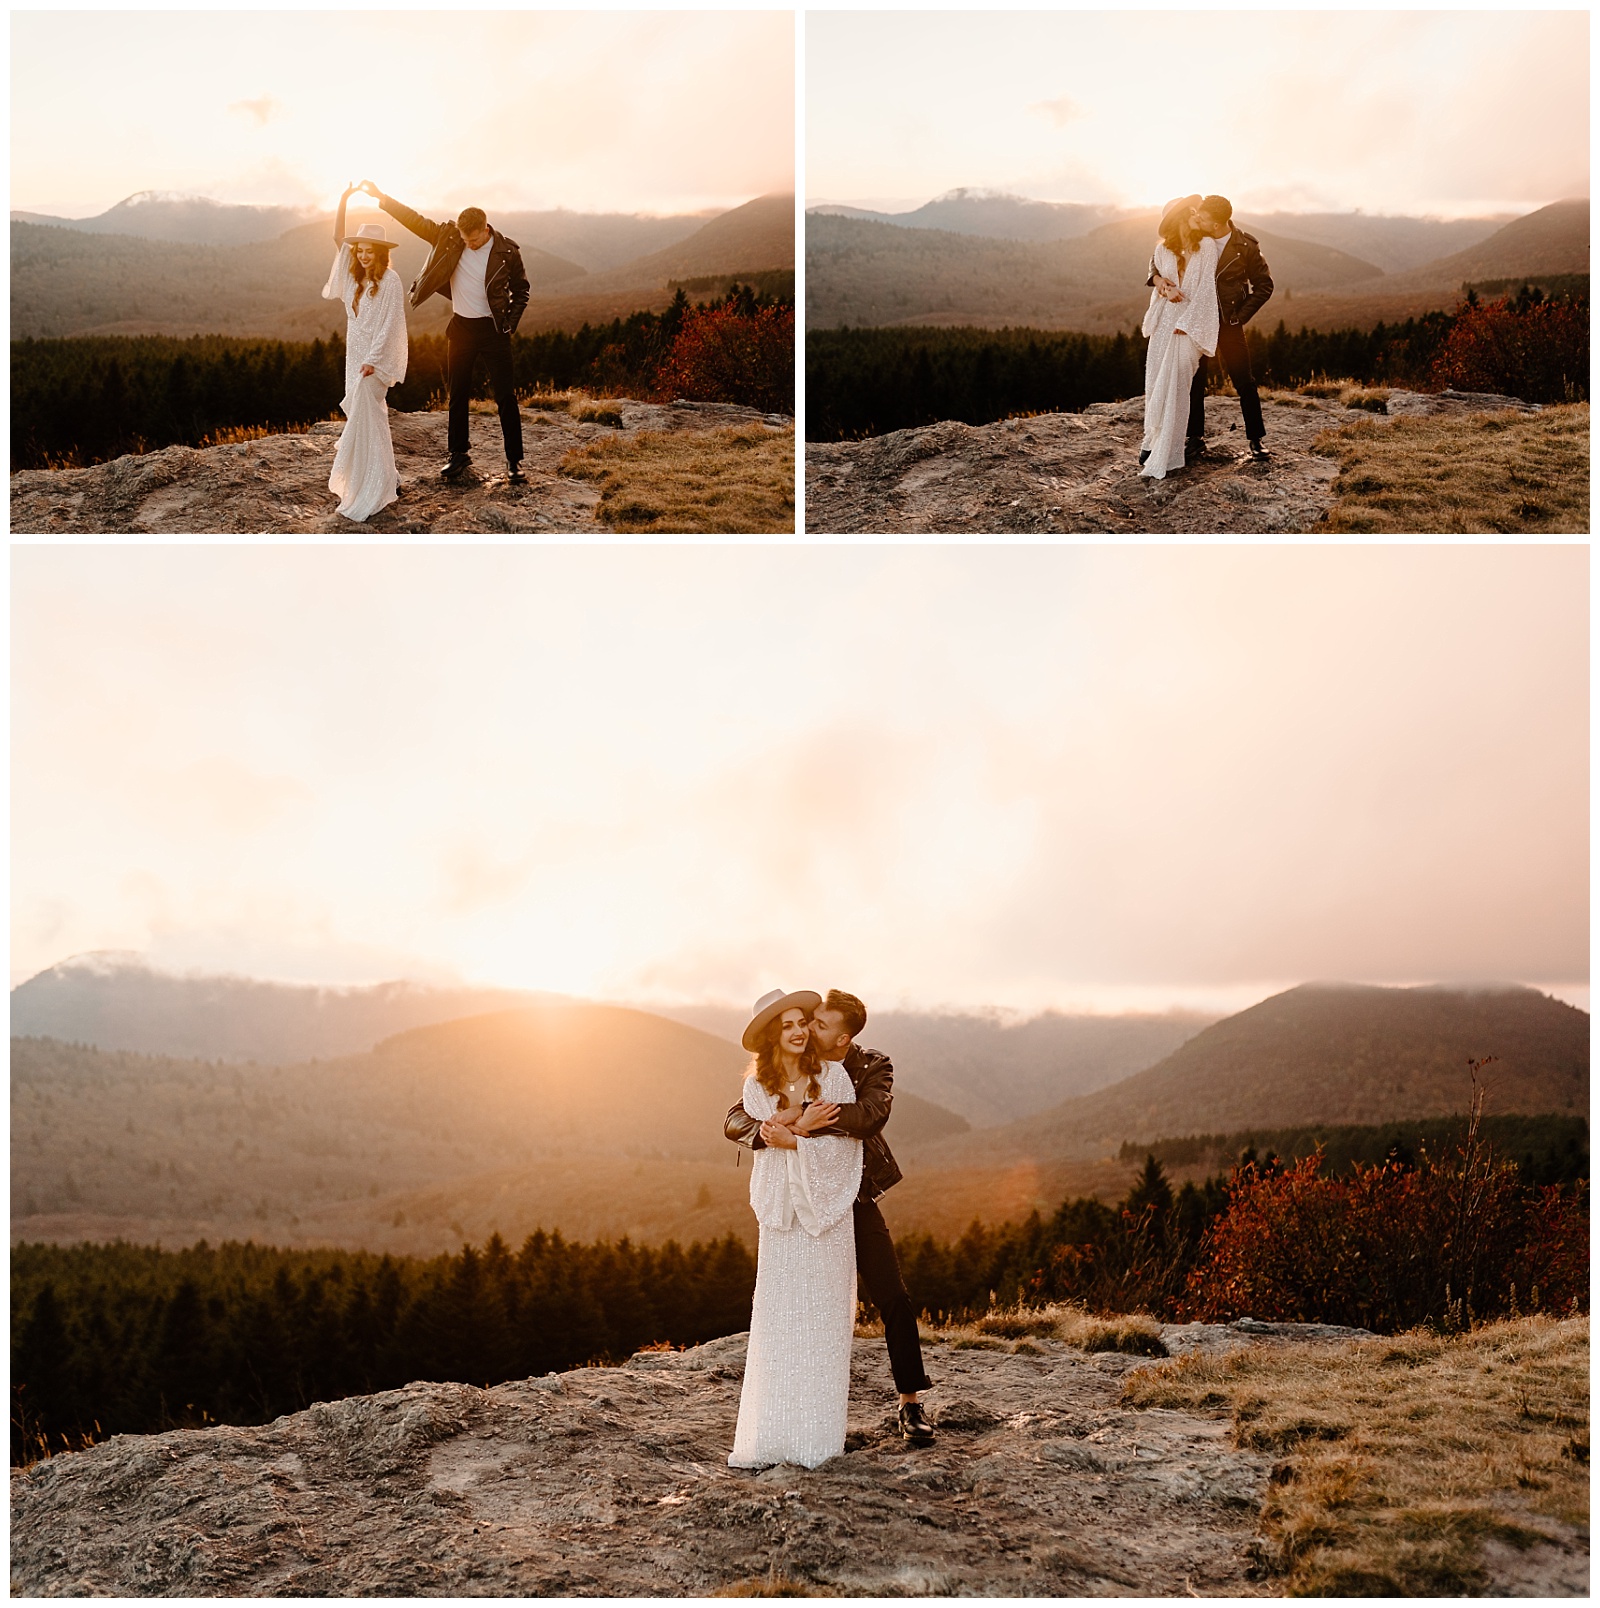 groom in leather jacket twirls new wife in boho white gown with flowy sleeves on top of asheville nc mountains for their adventurous elopement photoshoot